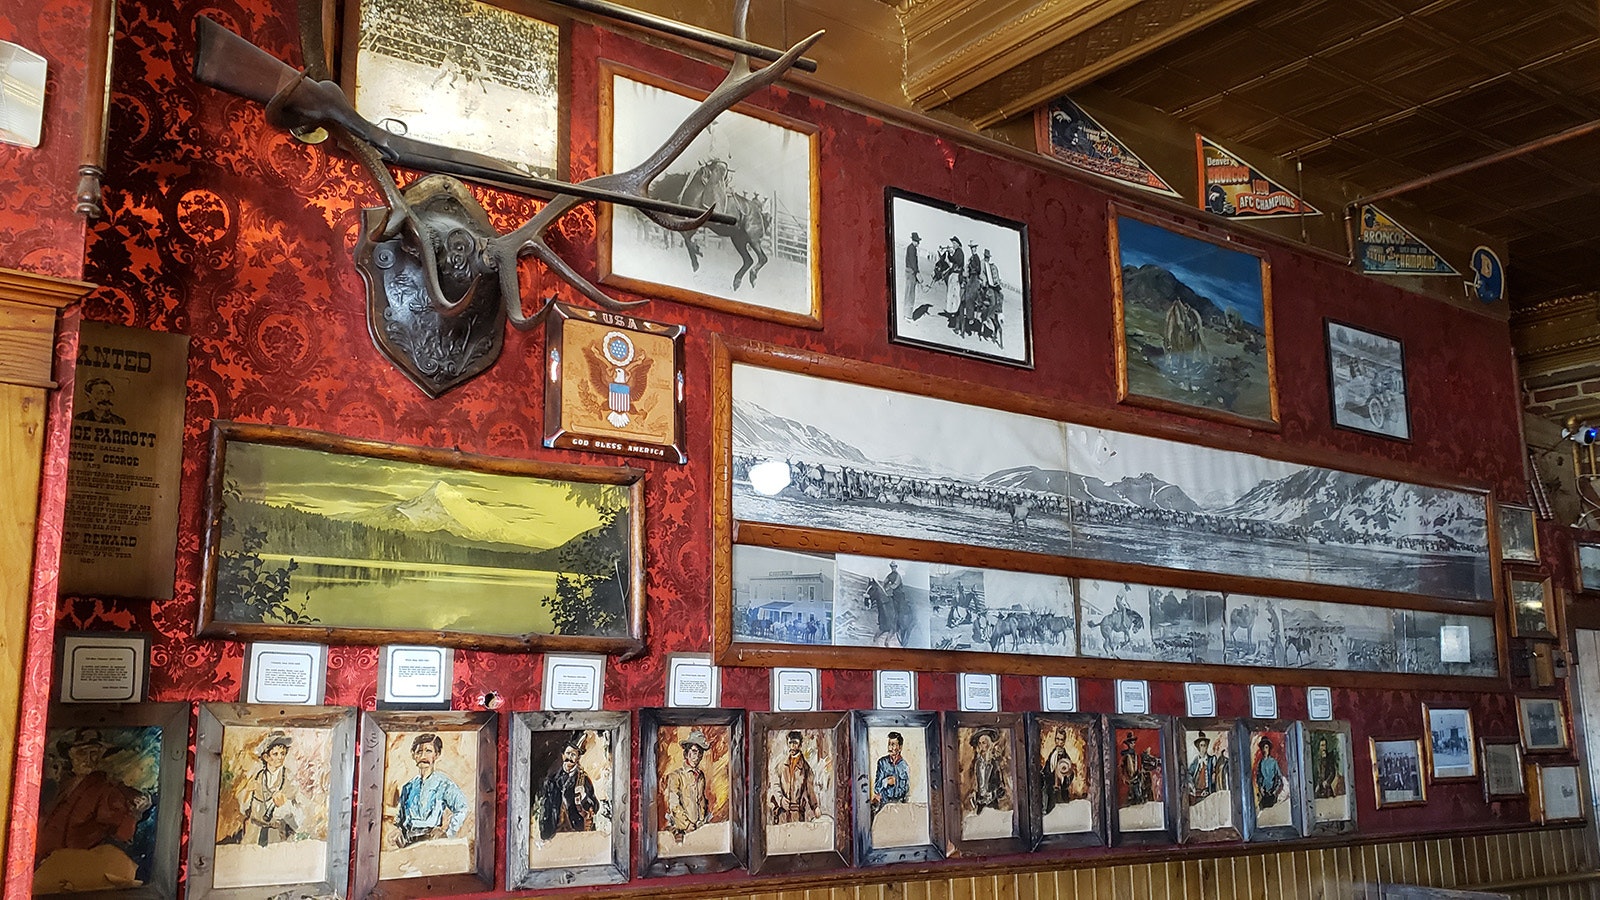 An outlaw wall features portraits of notorious Western people.